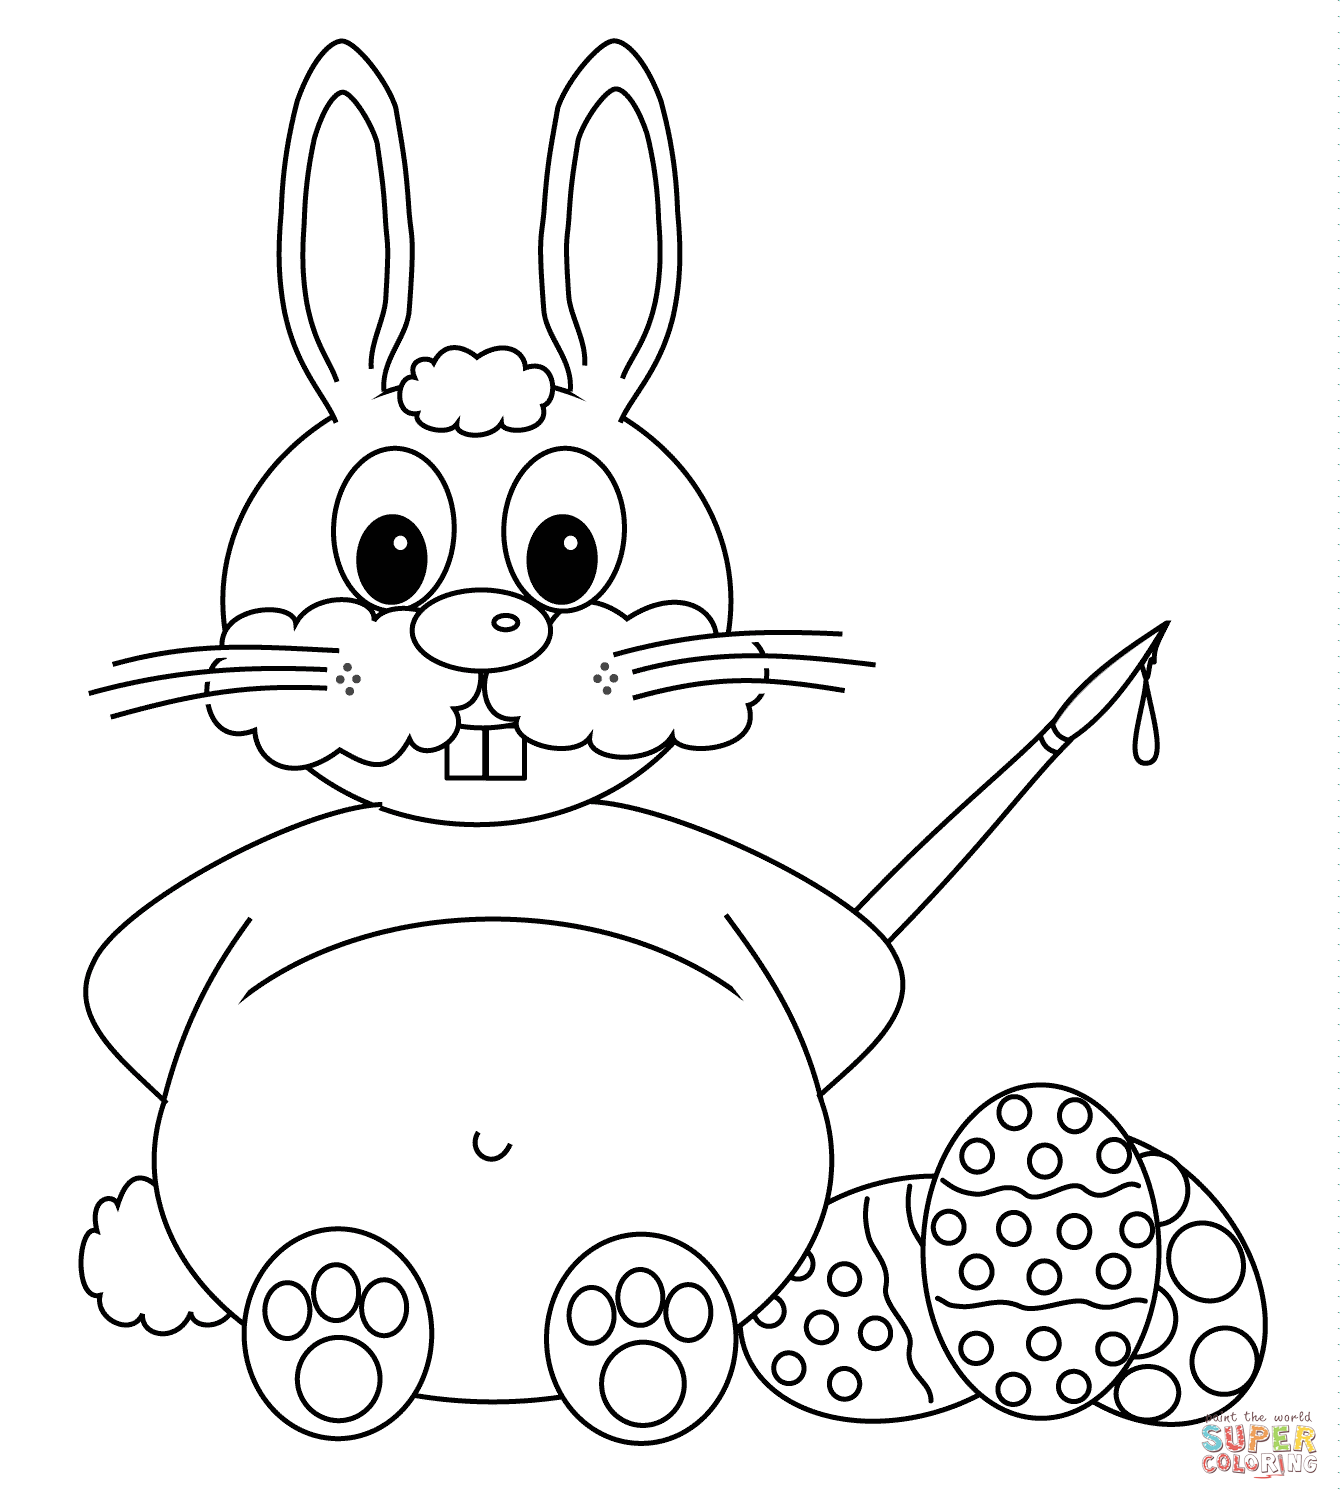 bunny outline drawing at getdrawings | free download